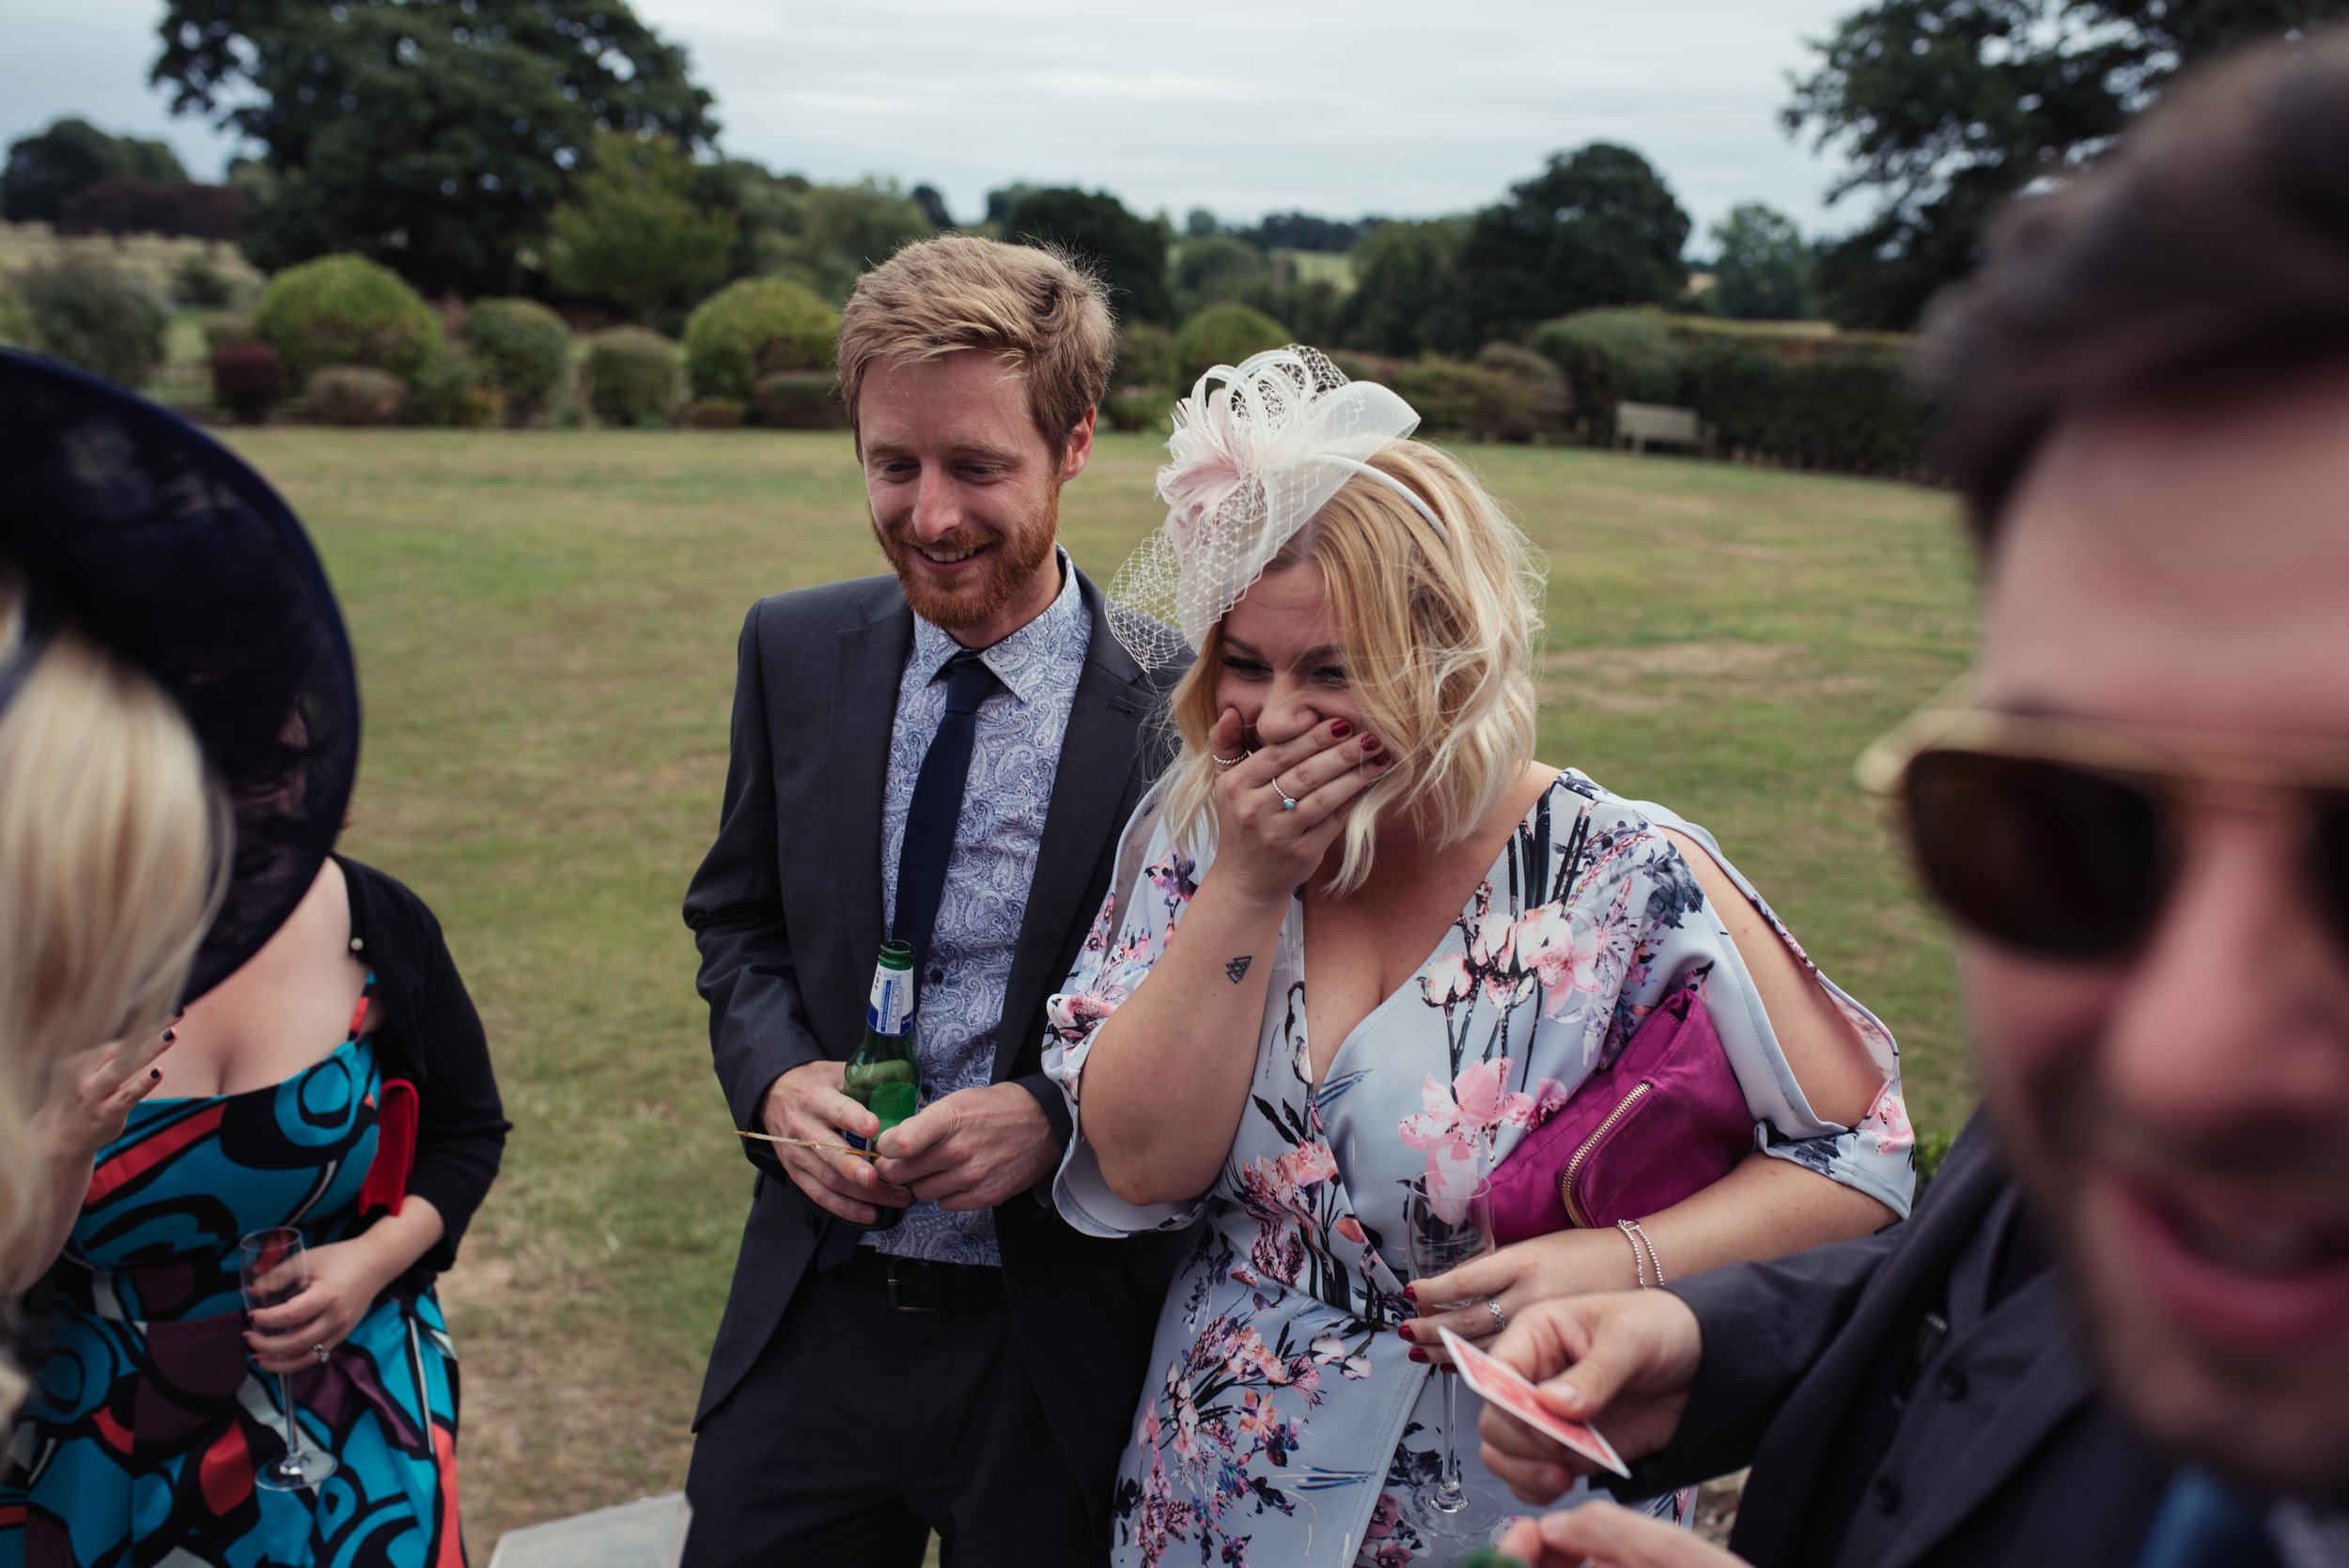 A wedding guest laughing her head off